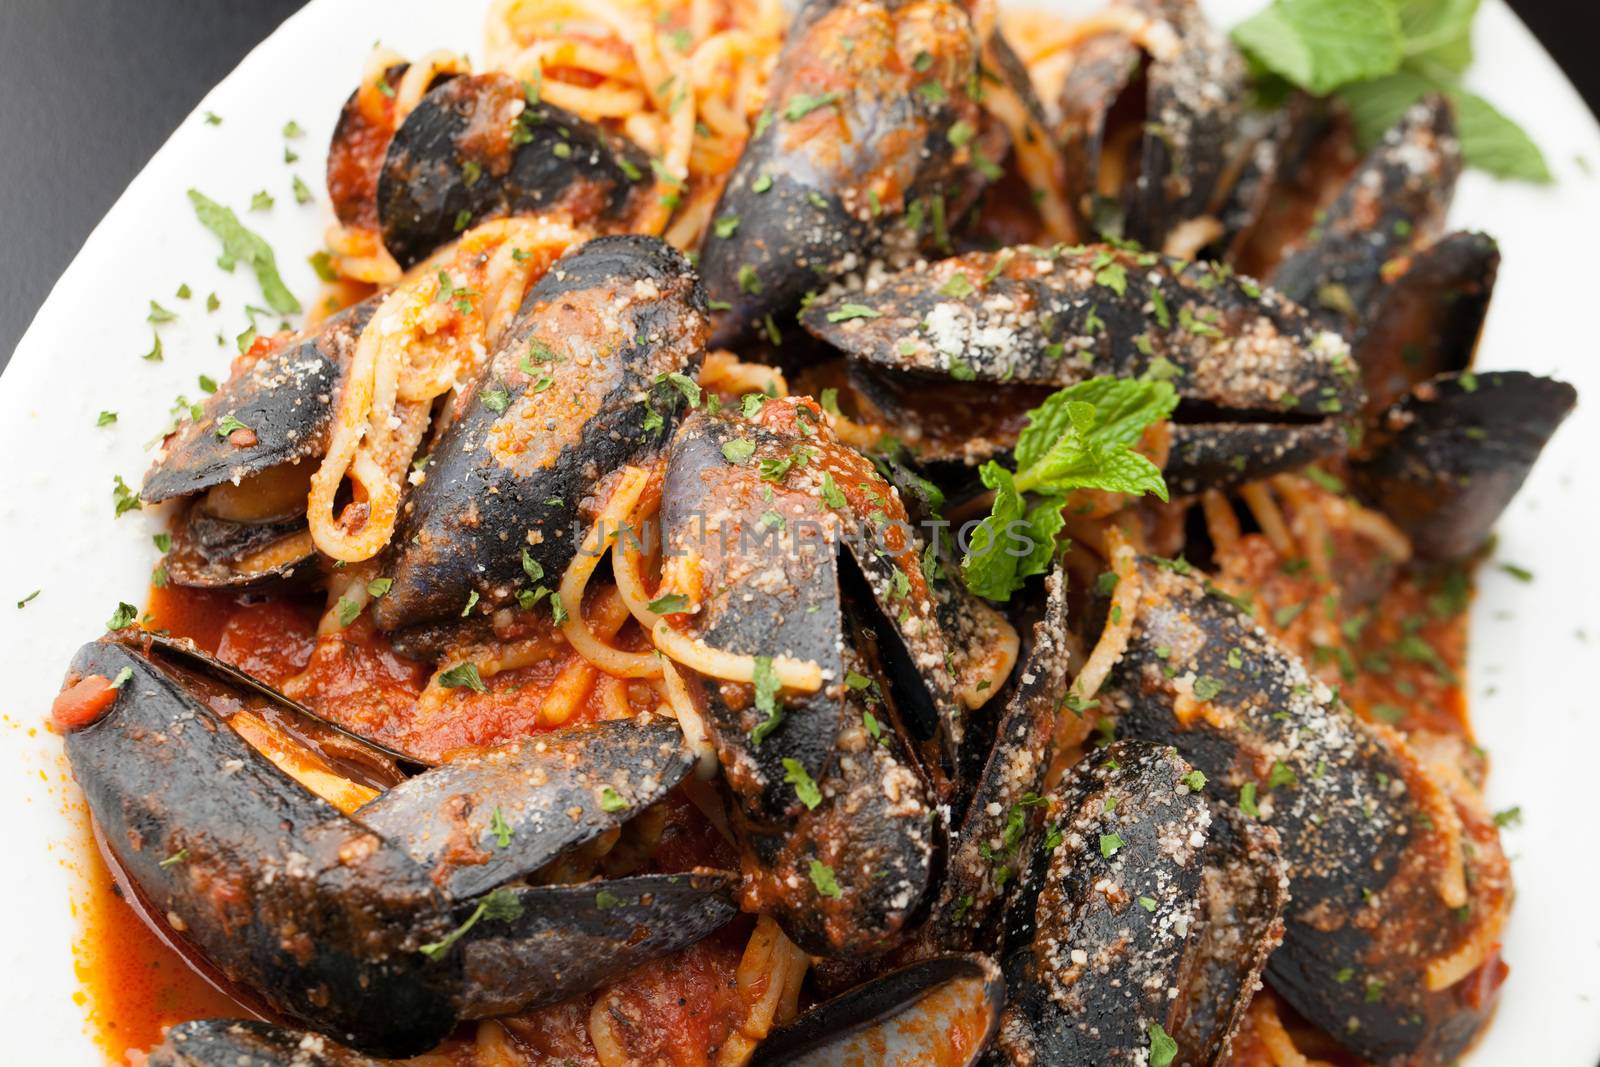 Mussels dinner with red sauce and pasta and an antipasto salad.  Shallow depth of field.